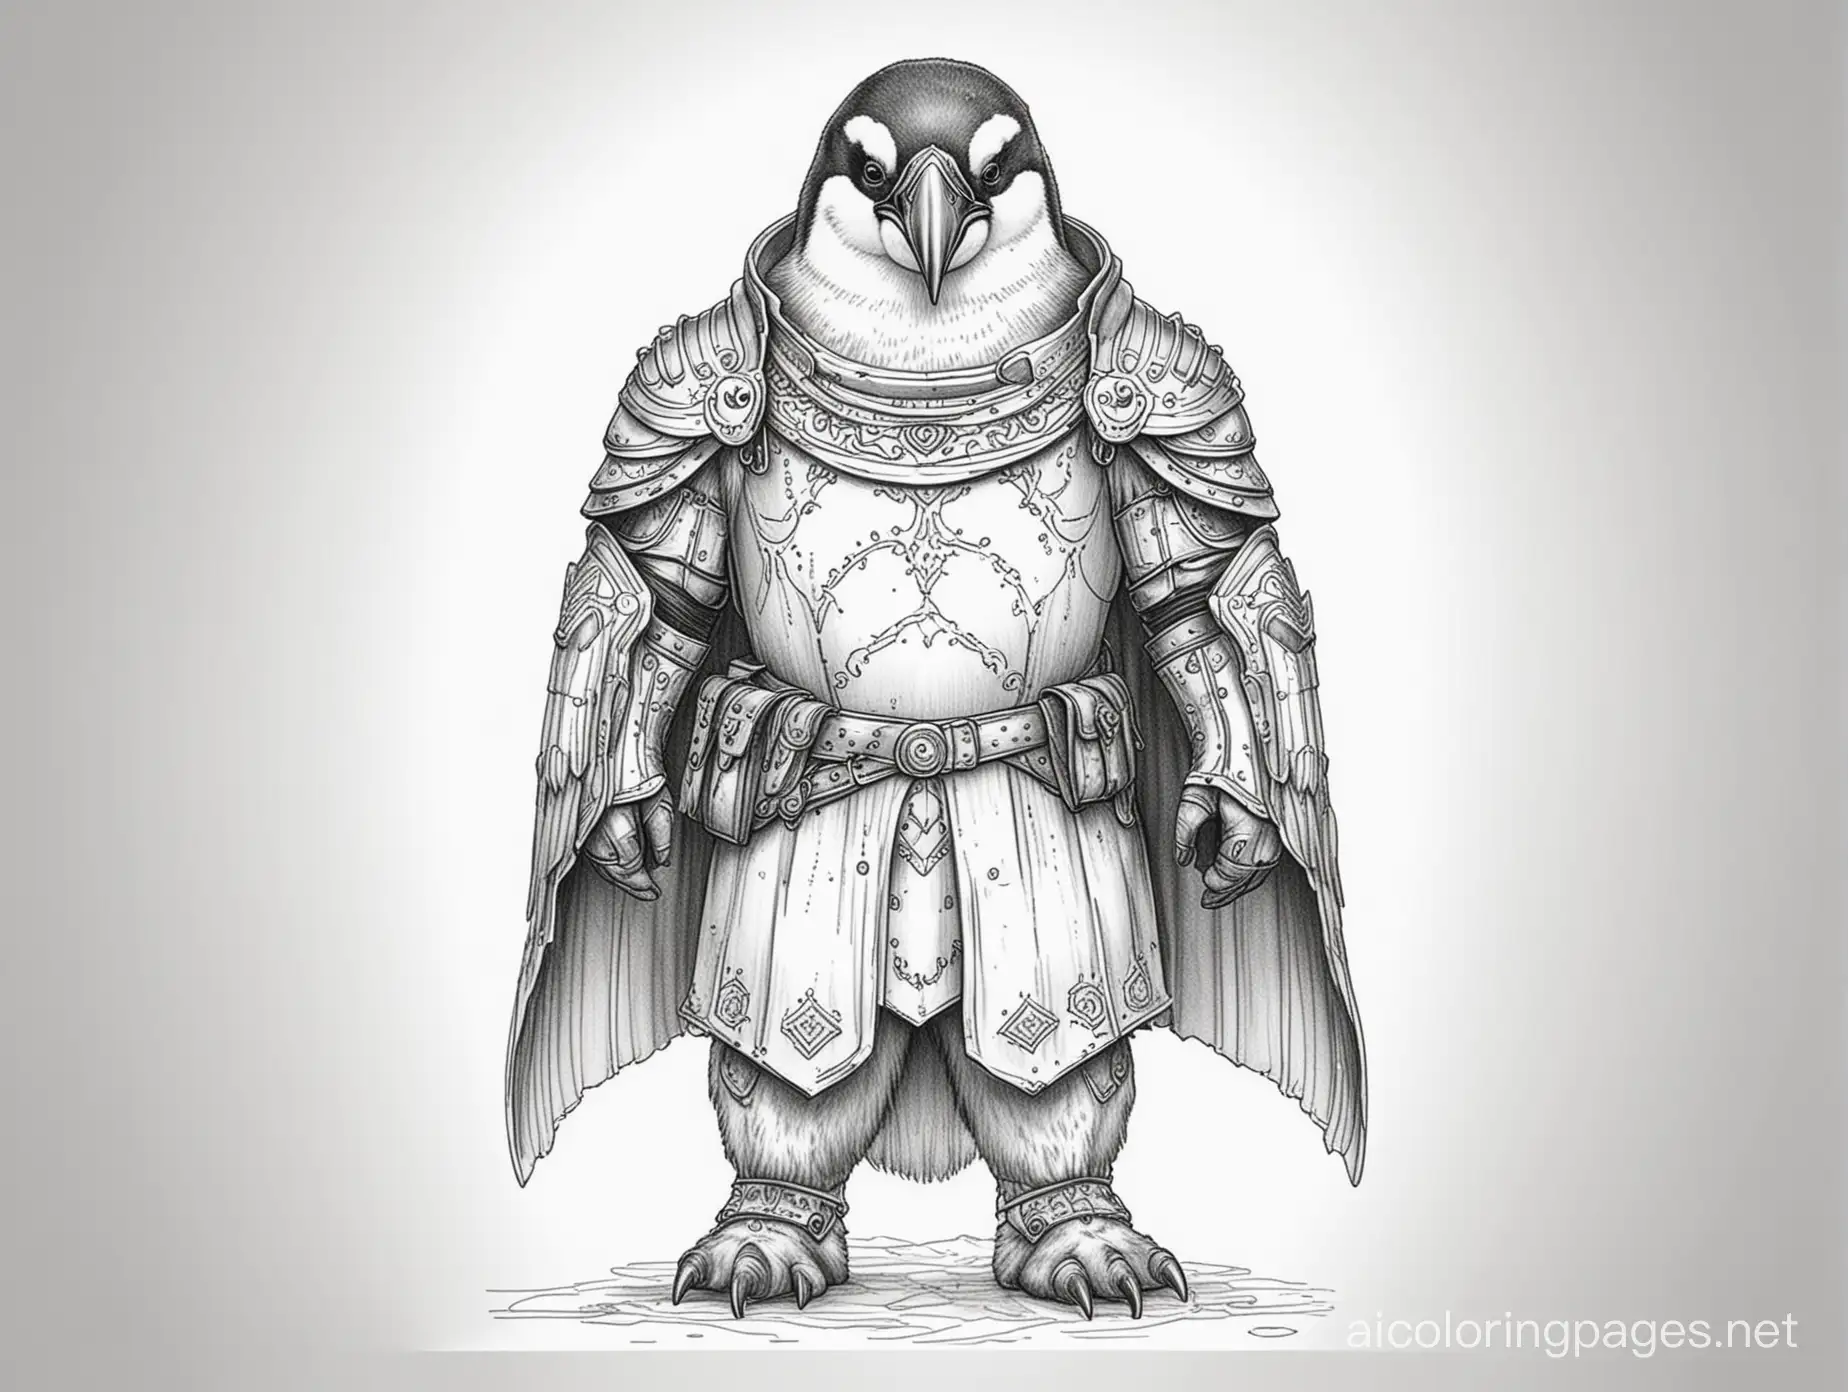 Armored emperor penguin knight, Coloring Page, black and white, line art, white background, Simplicity, Ample White Space. The background of the coloring page is plain white to make it easy for young children to color within the lines. The outlines of all the subjects are easy to distinguish, making it simple for kids to color without too much difficulty